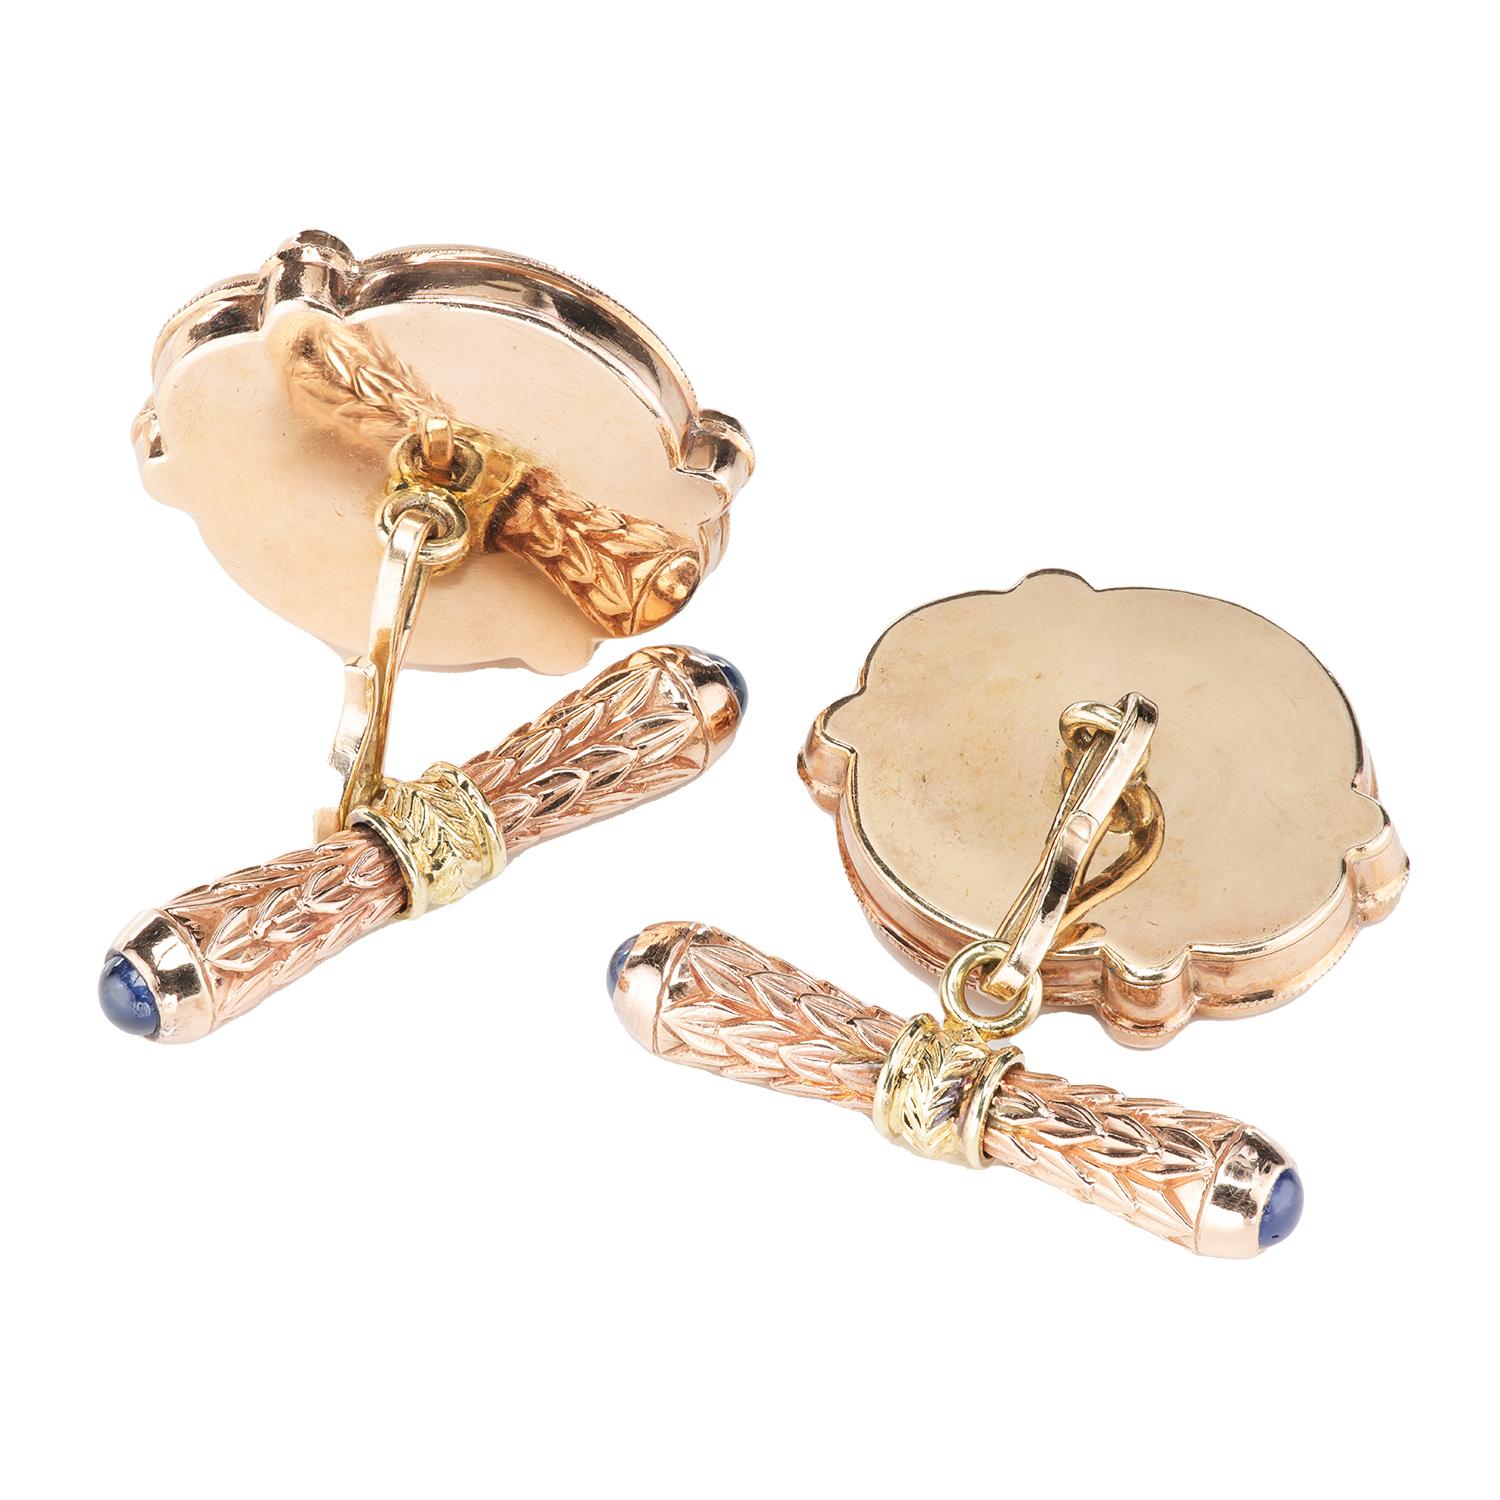 Empire Russian Imperial Style Cufflinks in Rose Gold with Diamond and Sapphires